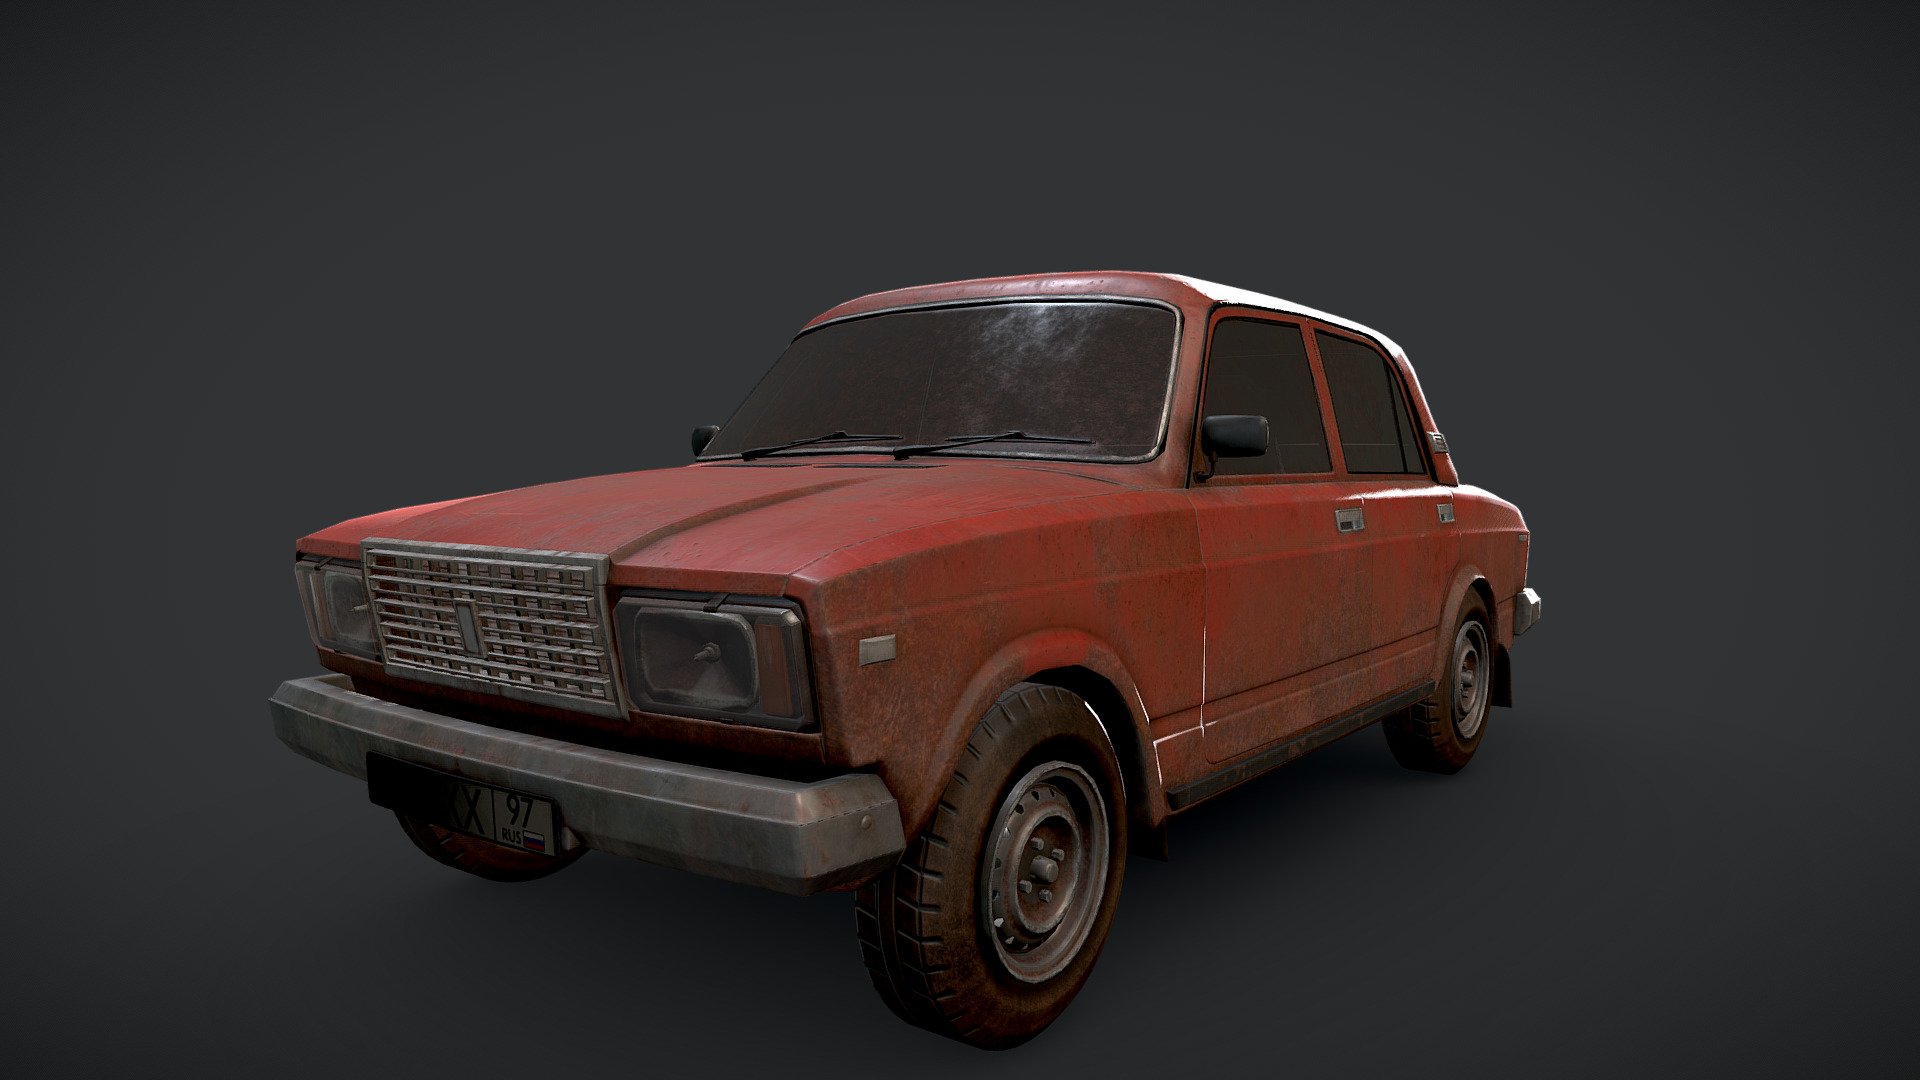 Check out the asset: artstation.com/artwork/zOoddd
A game asset that I created for one of my environments. The car is based on an old soviet car, VAZ 2107.
The mesh has 19.9k tris and uses four 2k materials. Rendered in Blender, using Eevee renderer 3d model